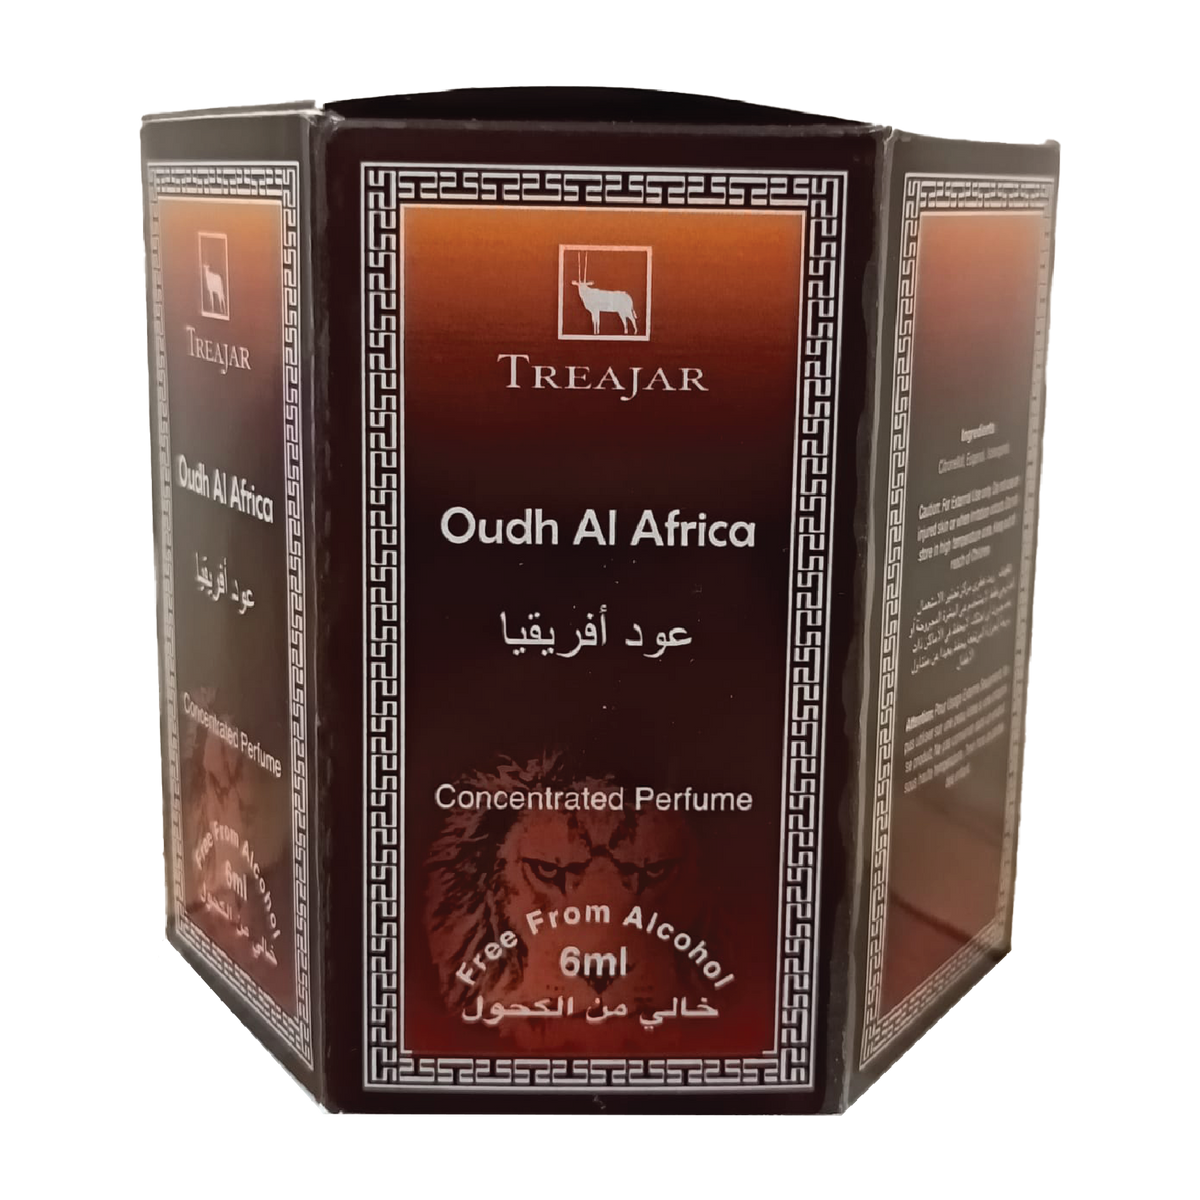 Treajar Concentrated Oils - Oudh Al Africa, 6ml - Pack of 6 Gardenia Cosmotrade LLP